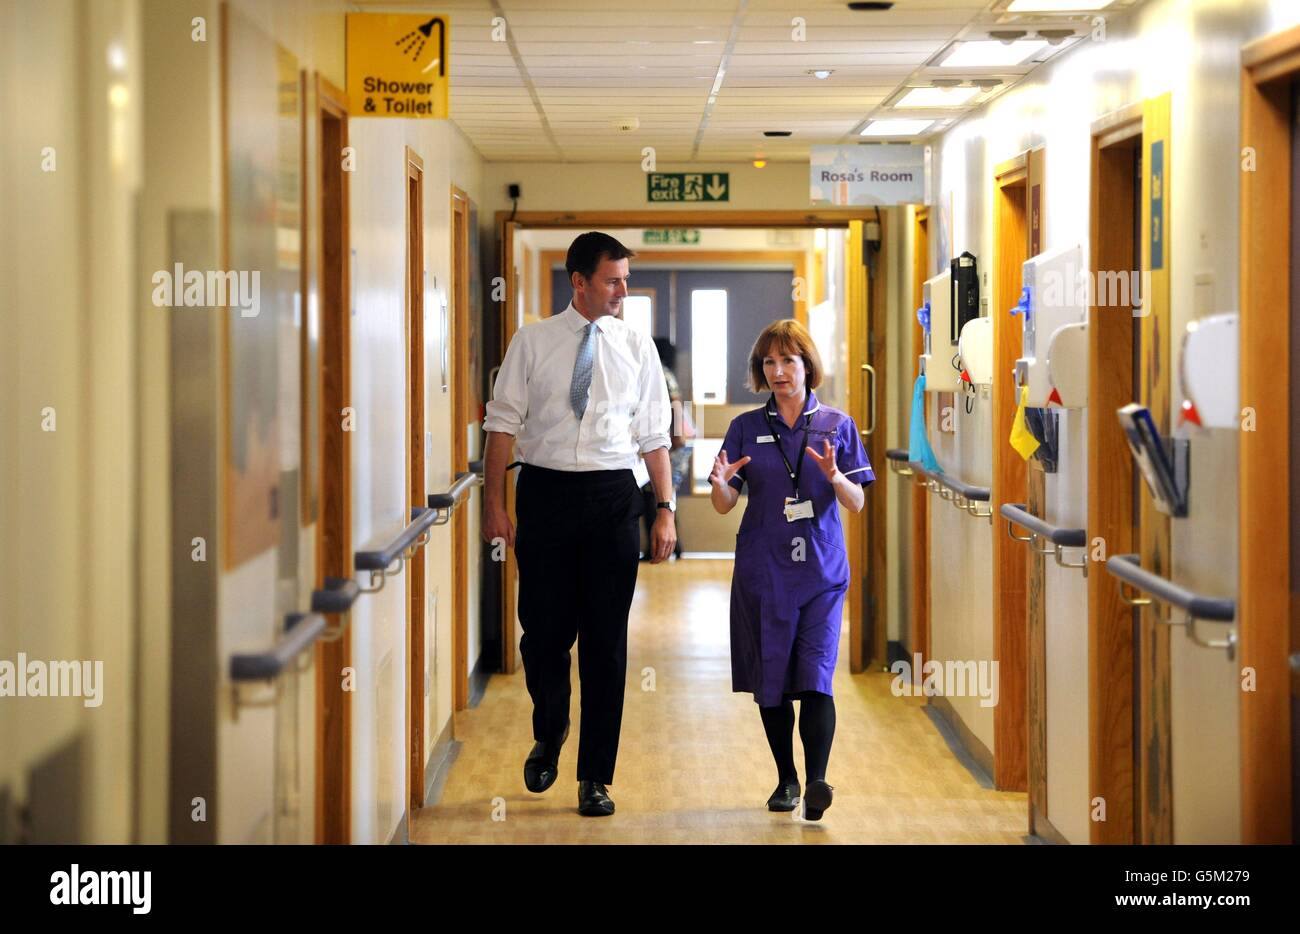 Health Secretary Jeremy Hunt meets matron Lisa de Jonge on the Marjory Warren ward at Kings College Hospital in London today. The ward is part of the Health and Ageing unit which assesses, treats and rehabilitates the elderly. Stock Photo